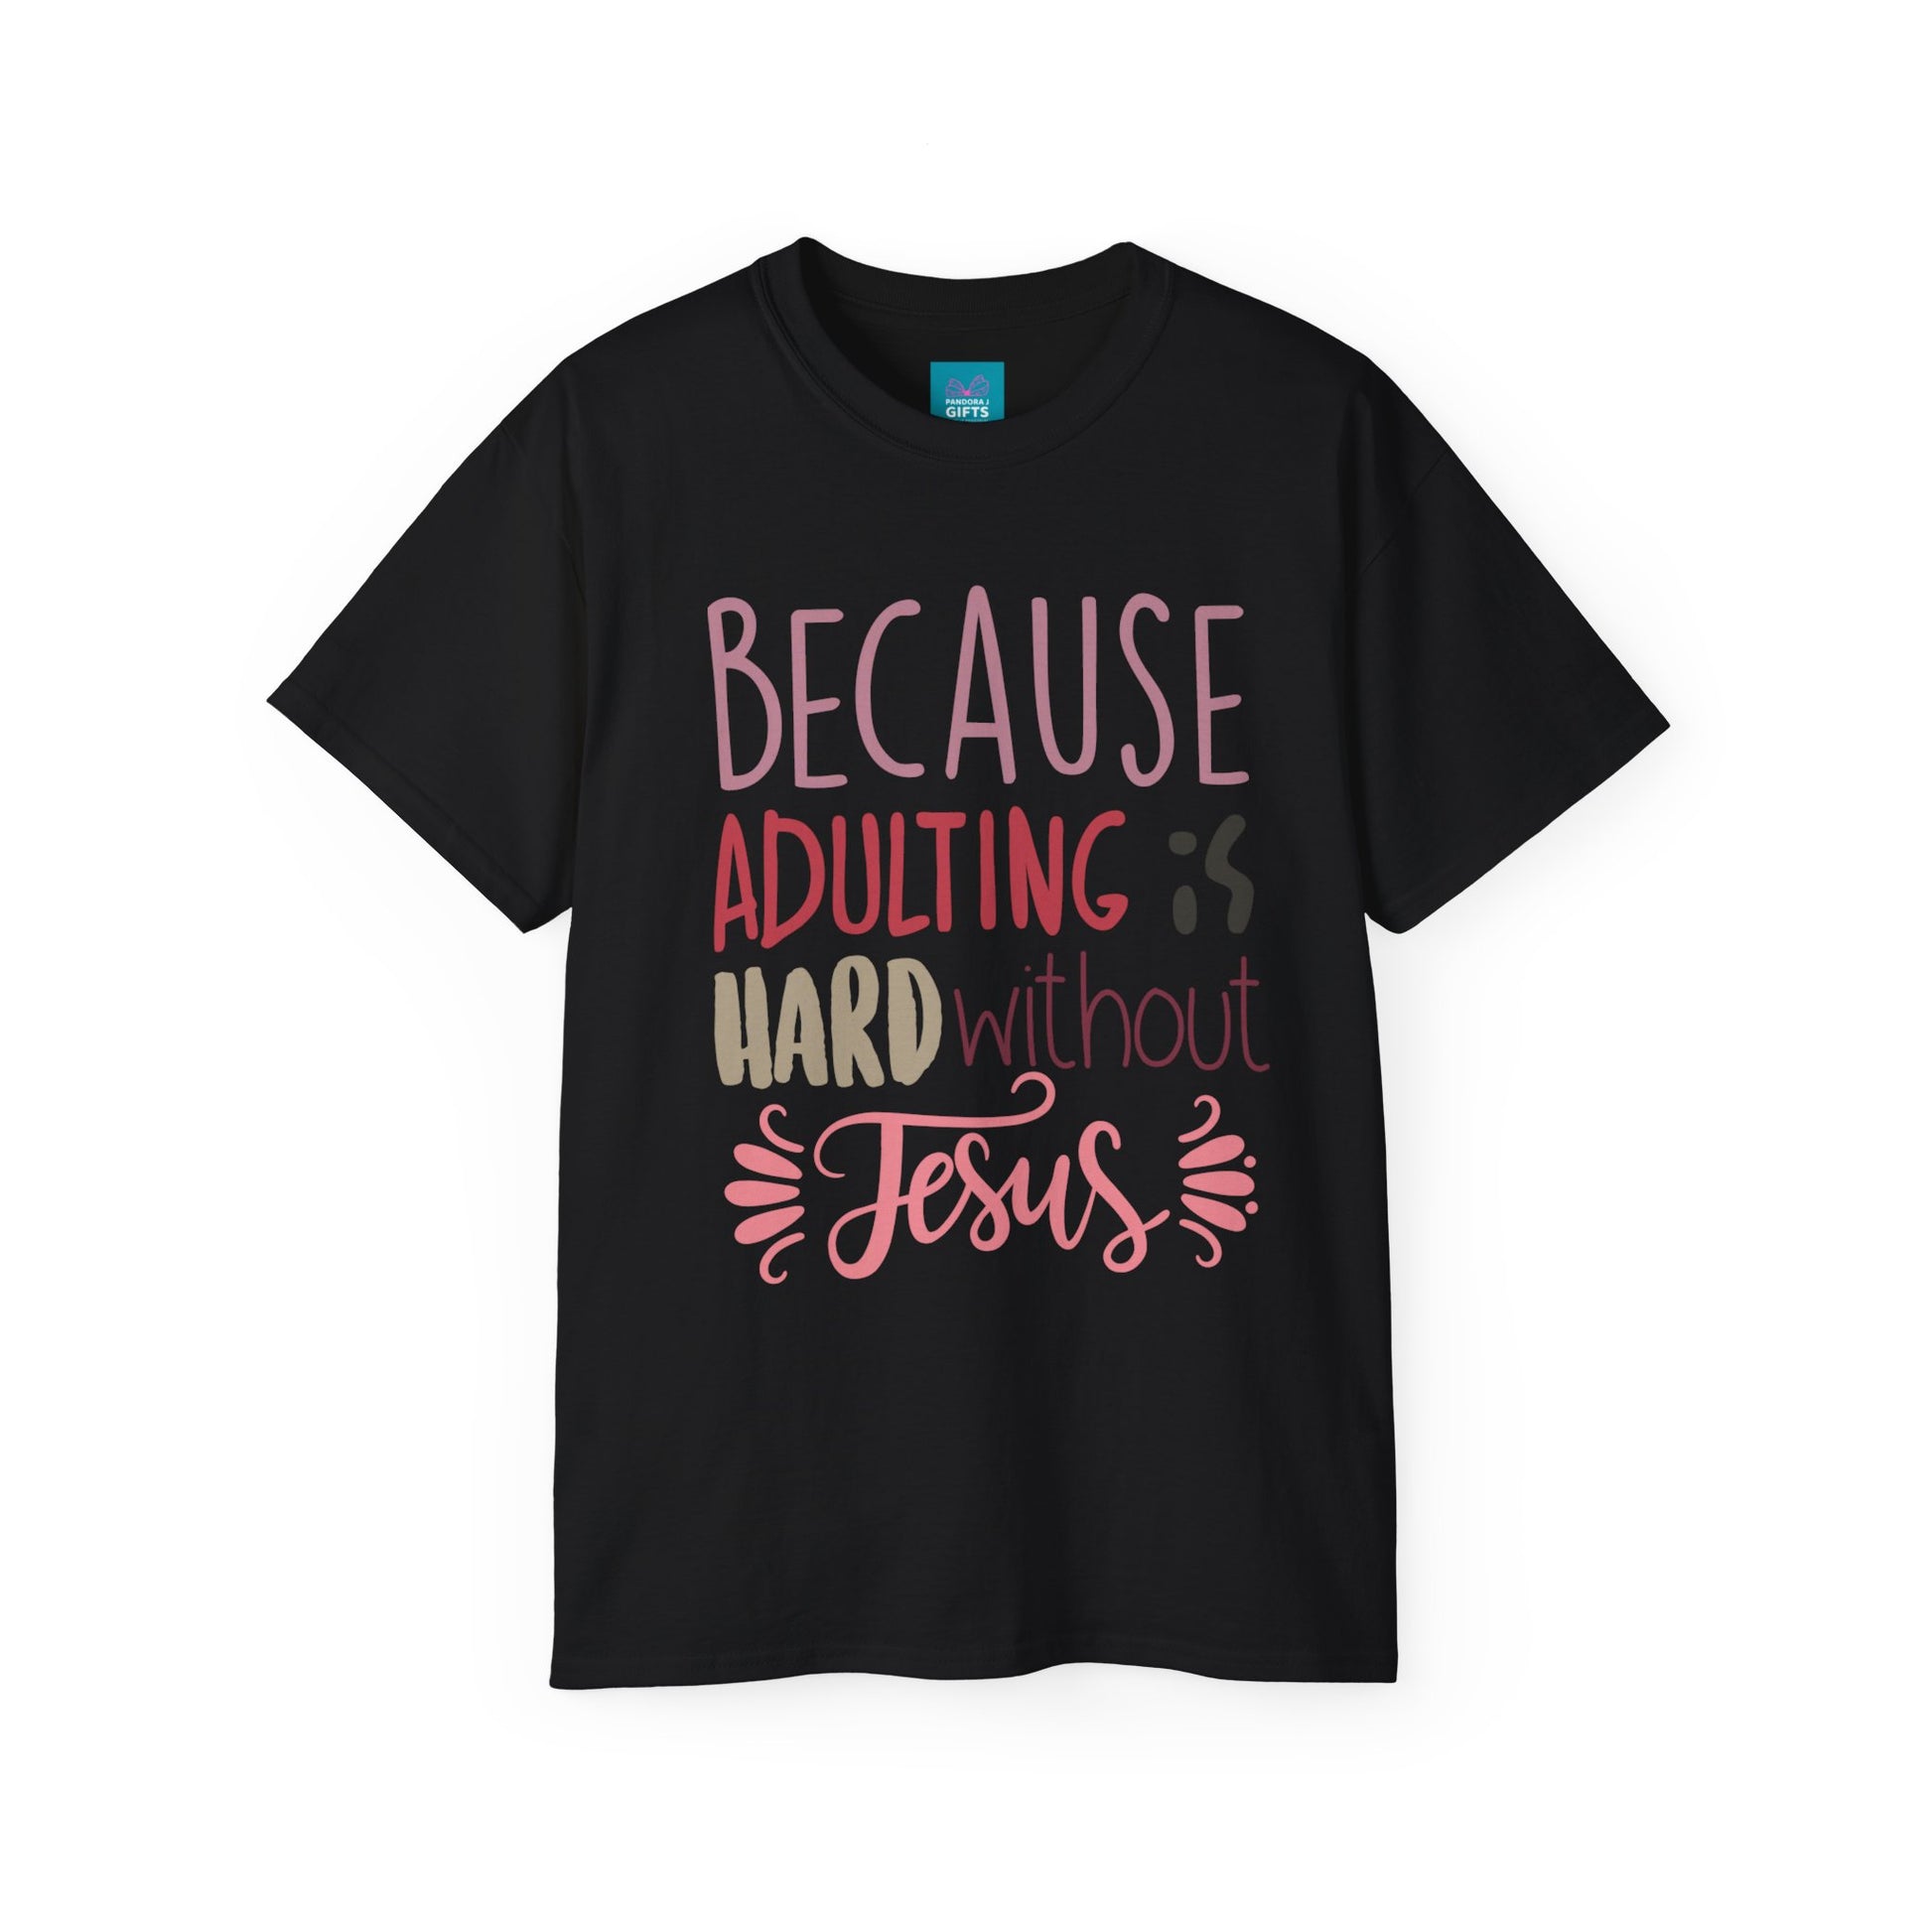 Black shirt with words "Because Adulting is Hard without Jesus"